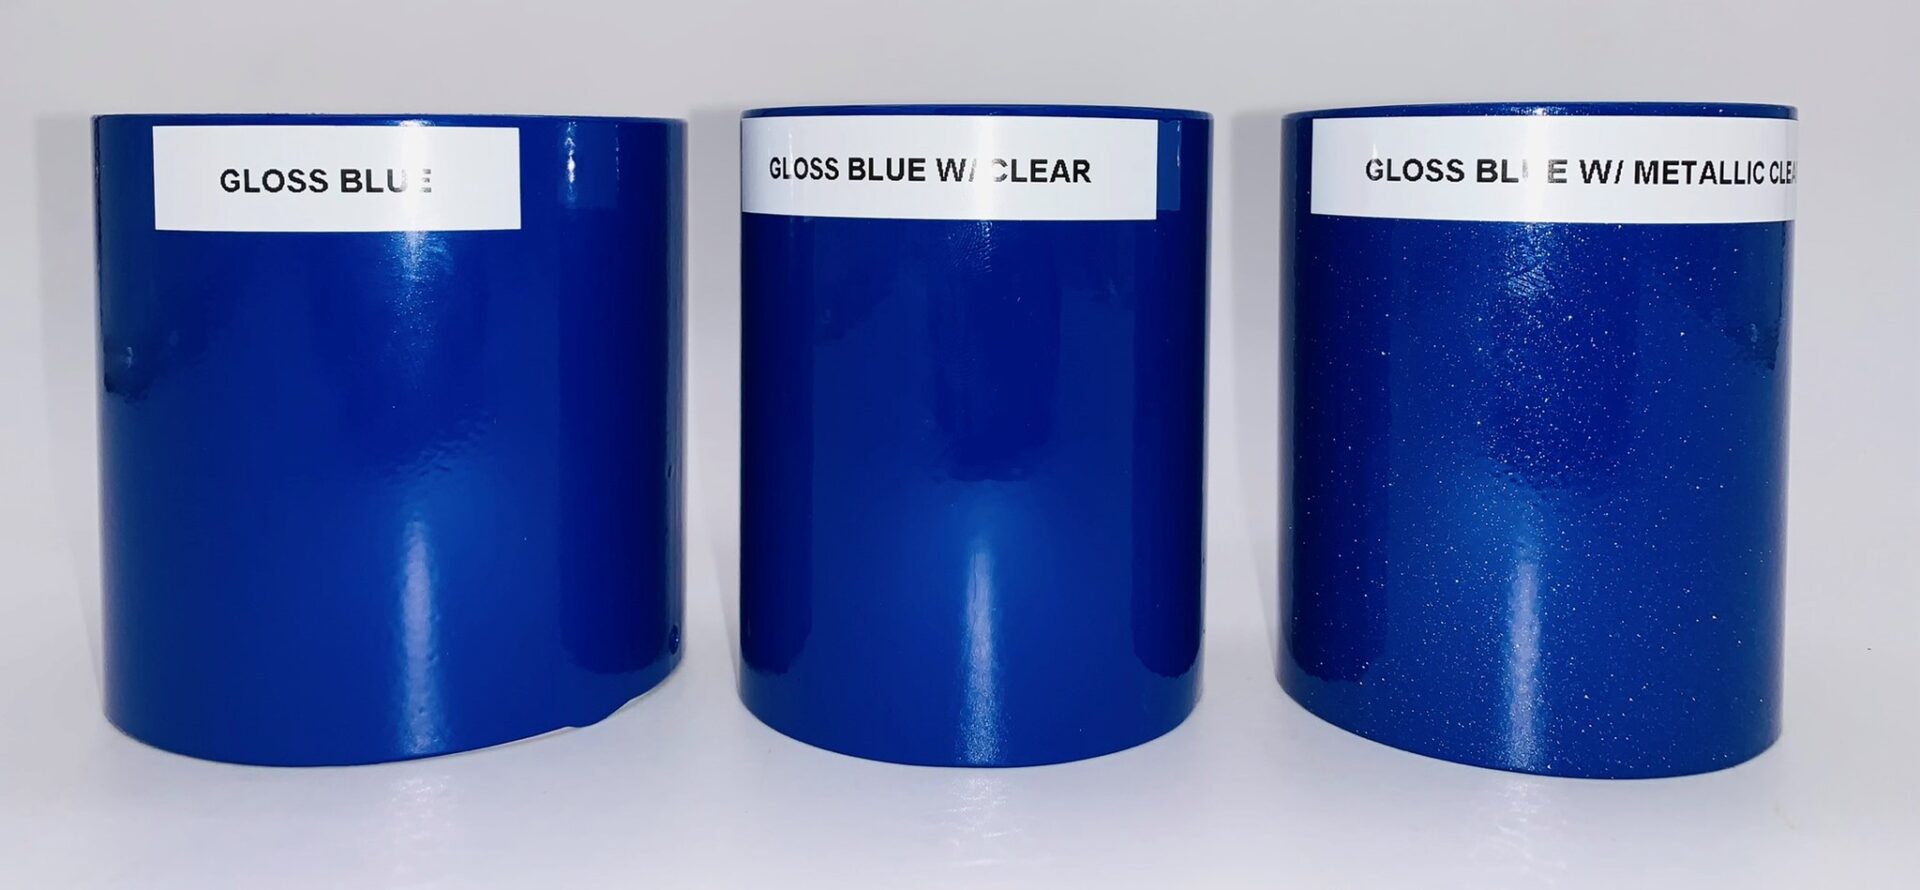 A set of three gloss blue with a clear part